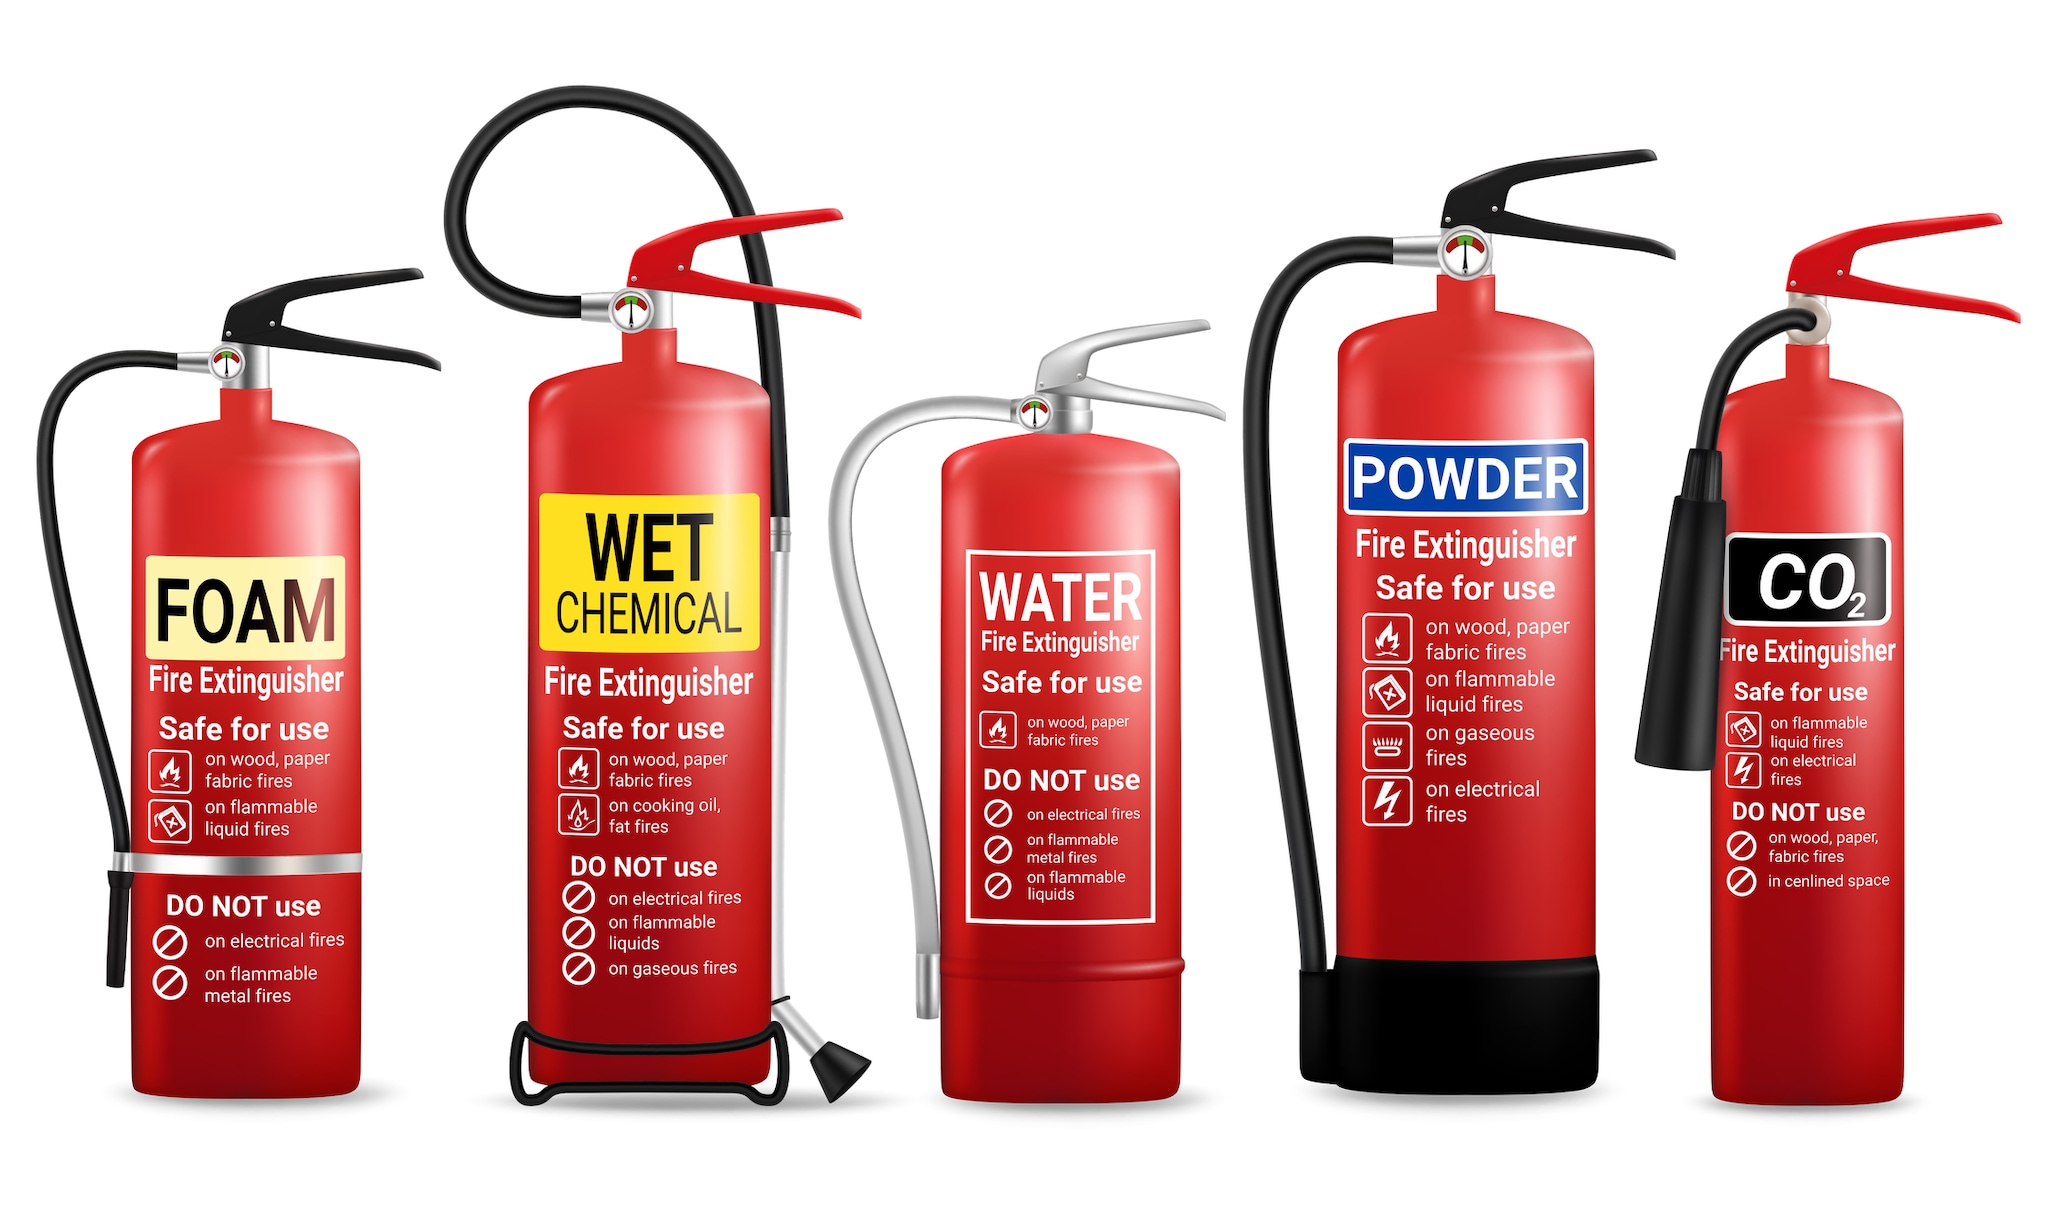 https://www.adt.com/content/dam/adt6/pages/resources/template/fire-extinguishers-lined-up.jpg